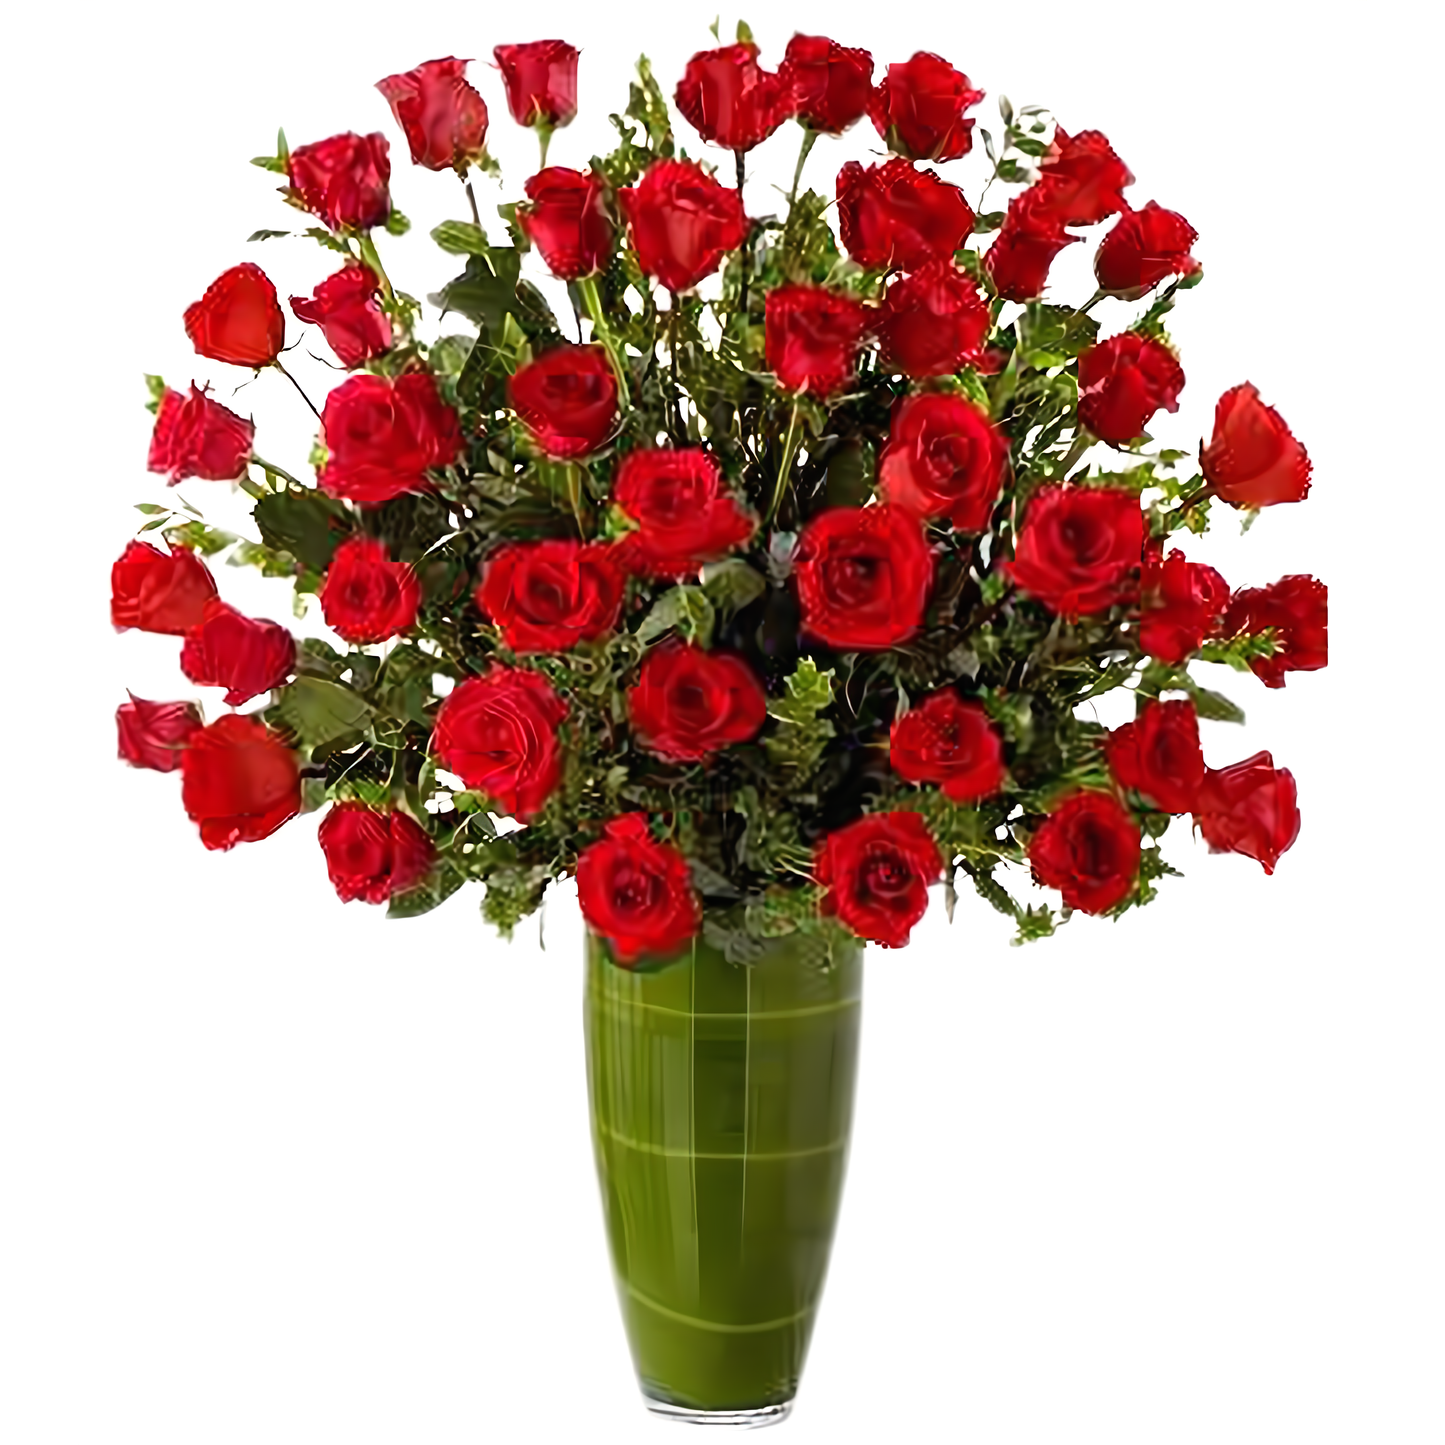 Luxury Rose Bouquet - 24 Premium Red Long Stem Roses - Products > Luxury Collection